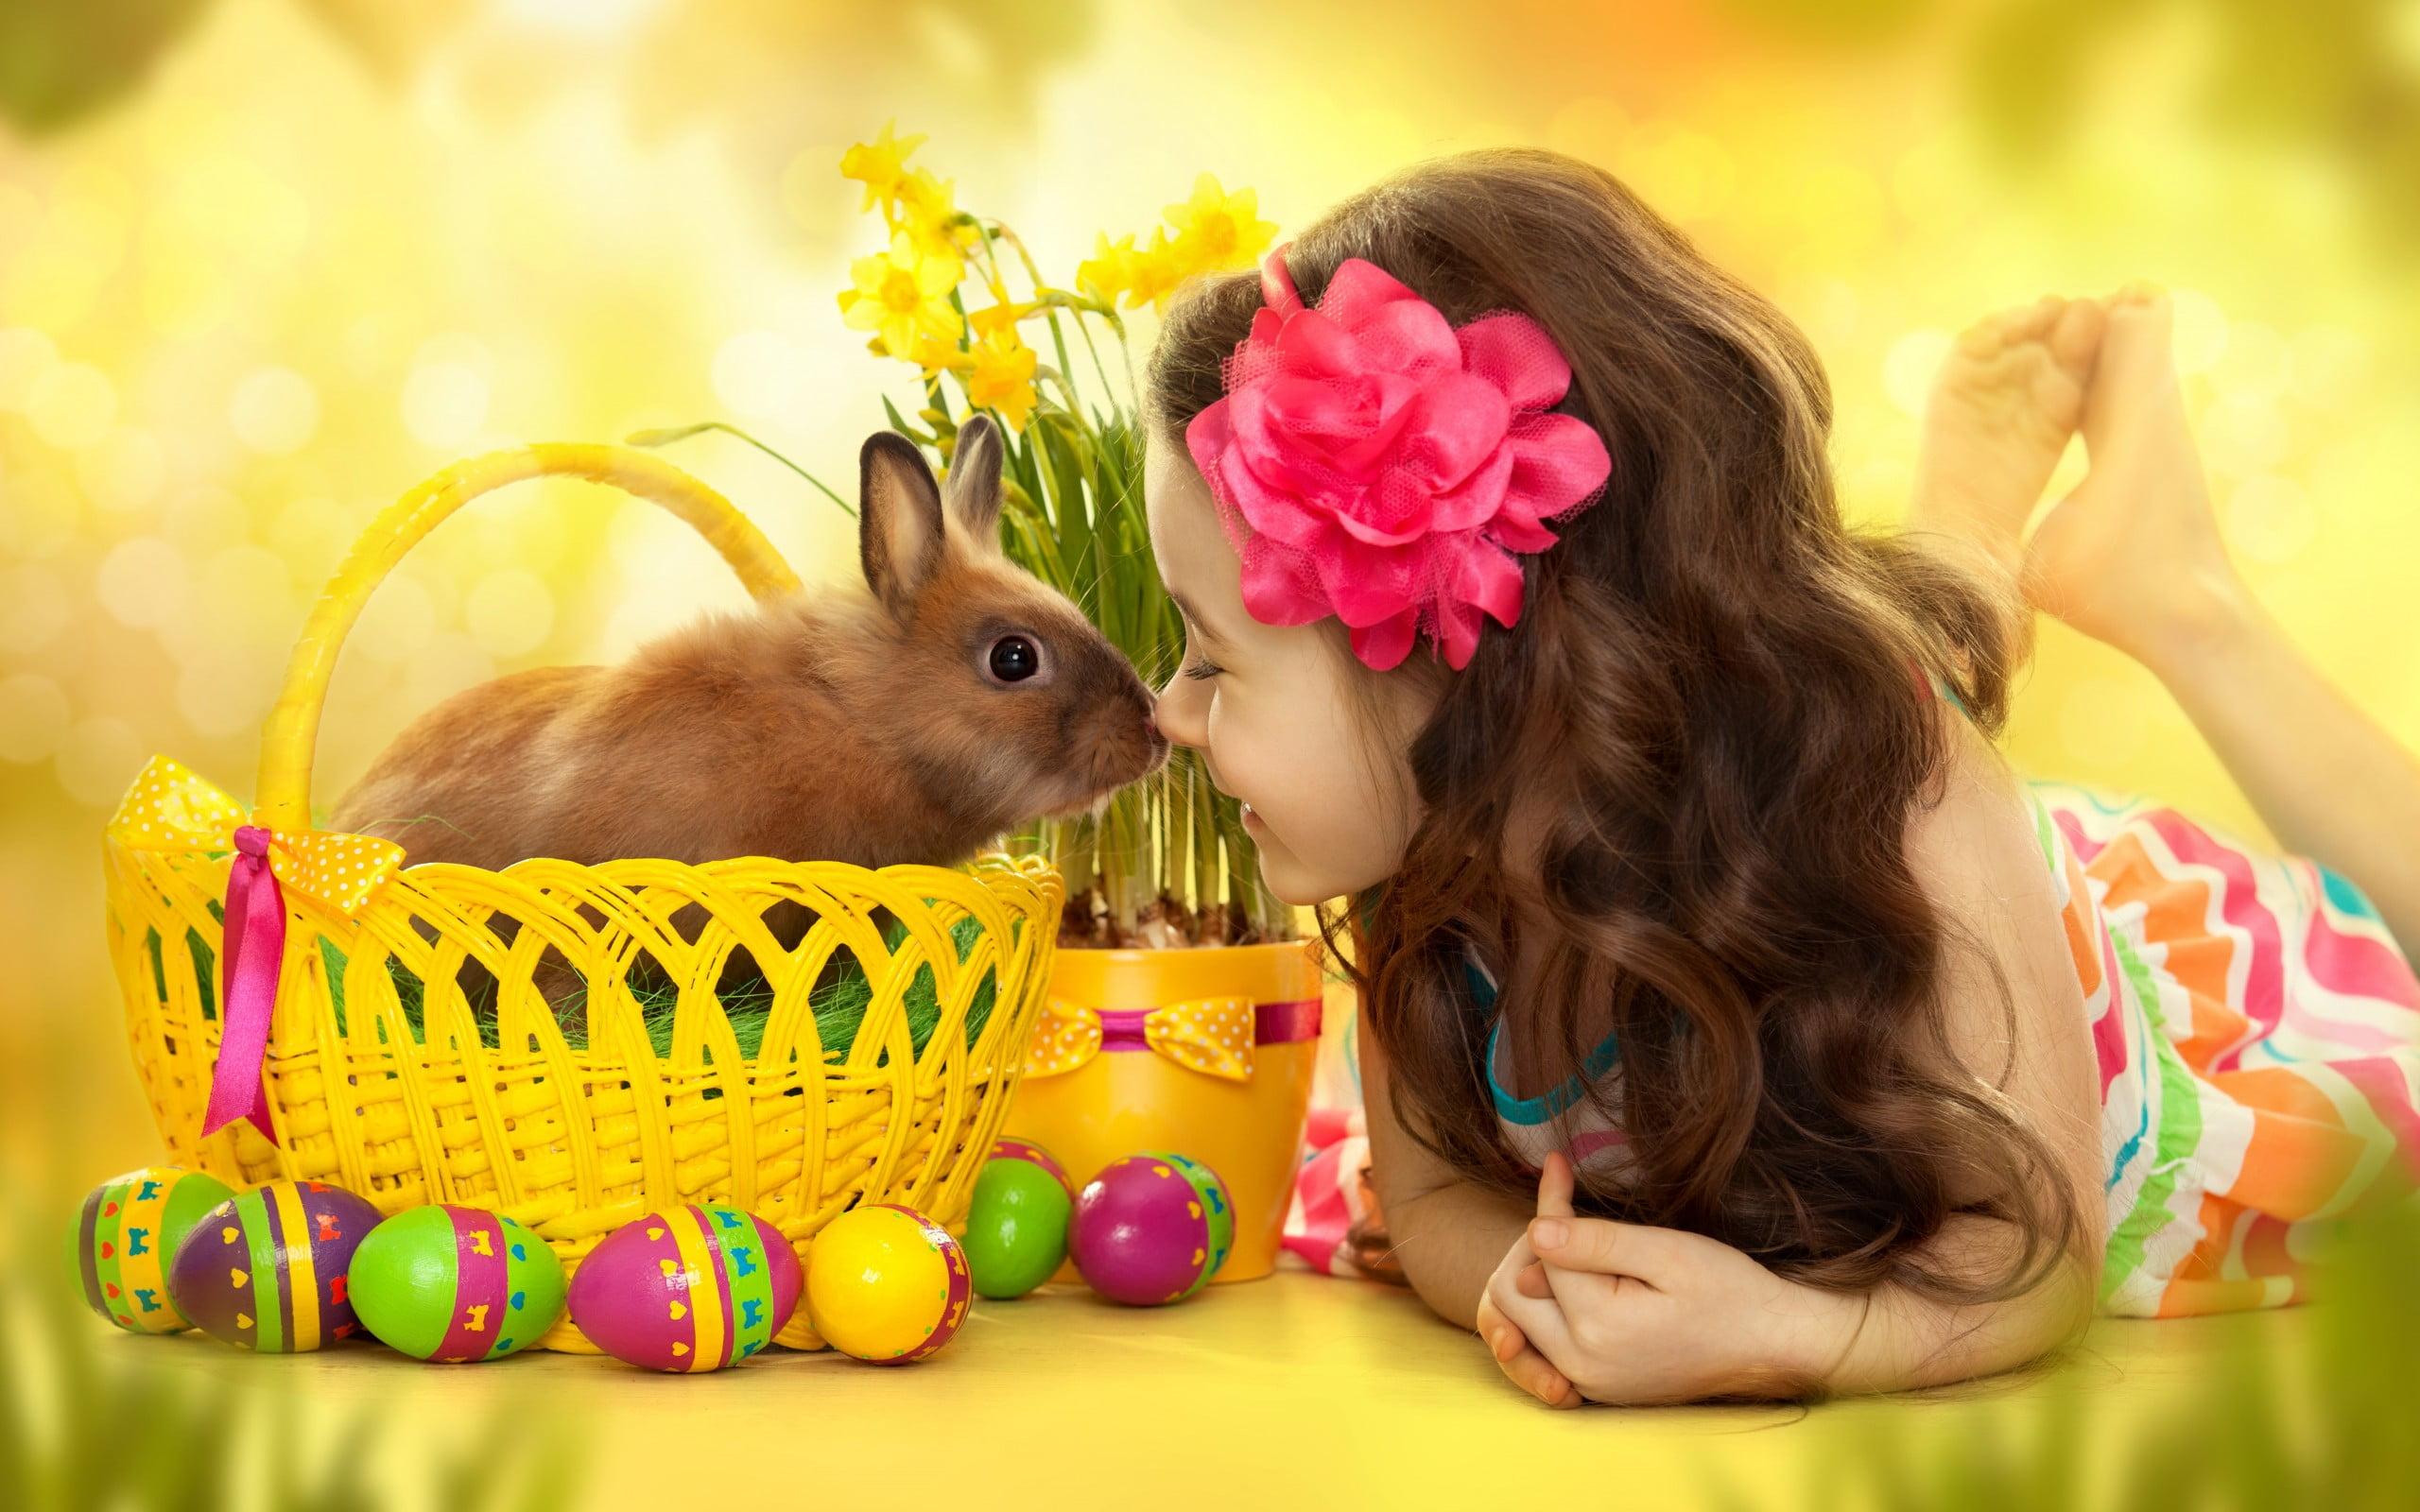 Brown rabbit and girl nose to nose photo HD wallpaper. Wallpaper